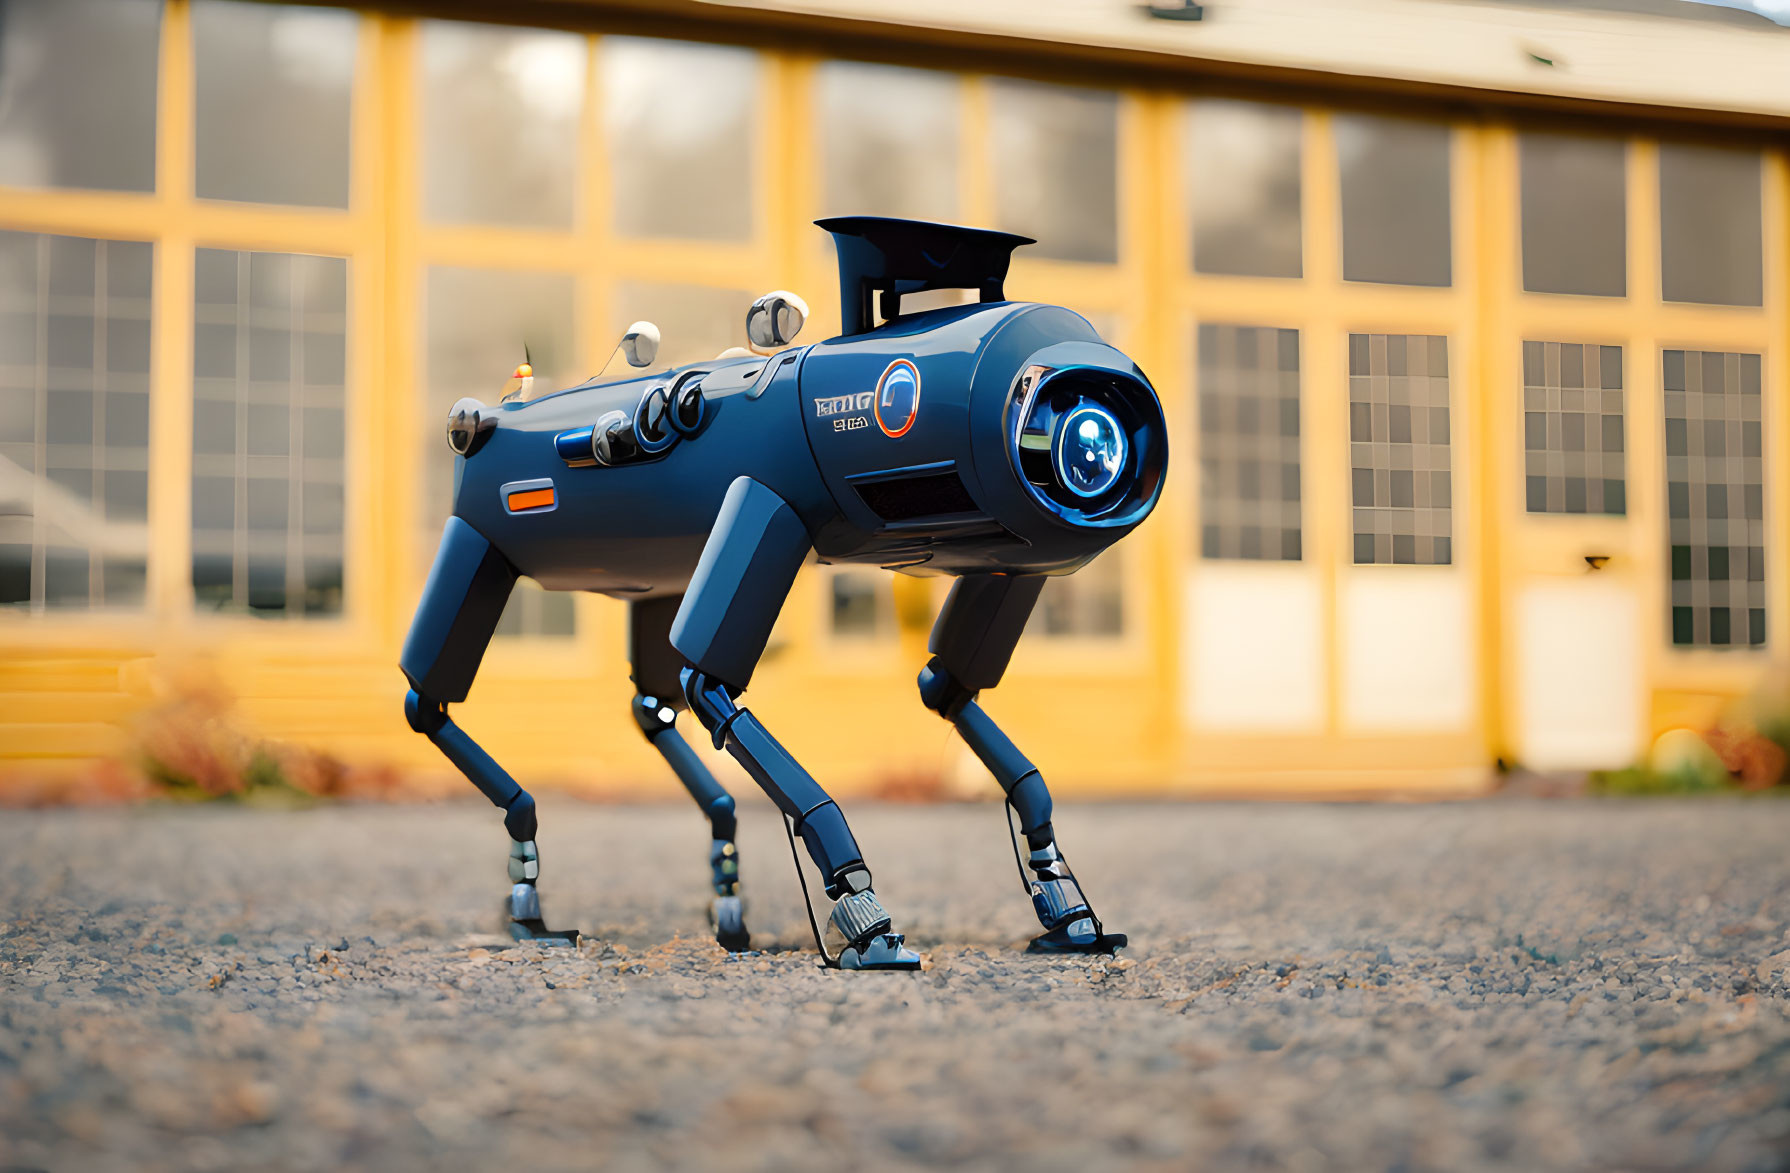 Blue and Black Quadrupedal Robot Outside Building with Yellow Windows